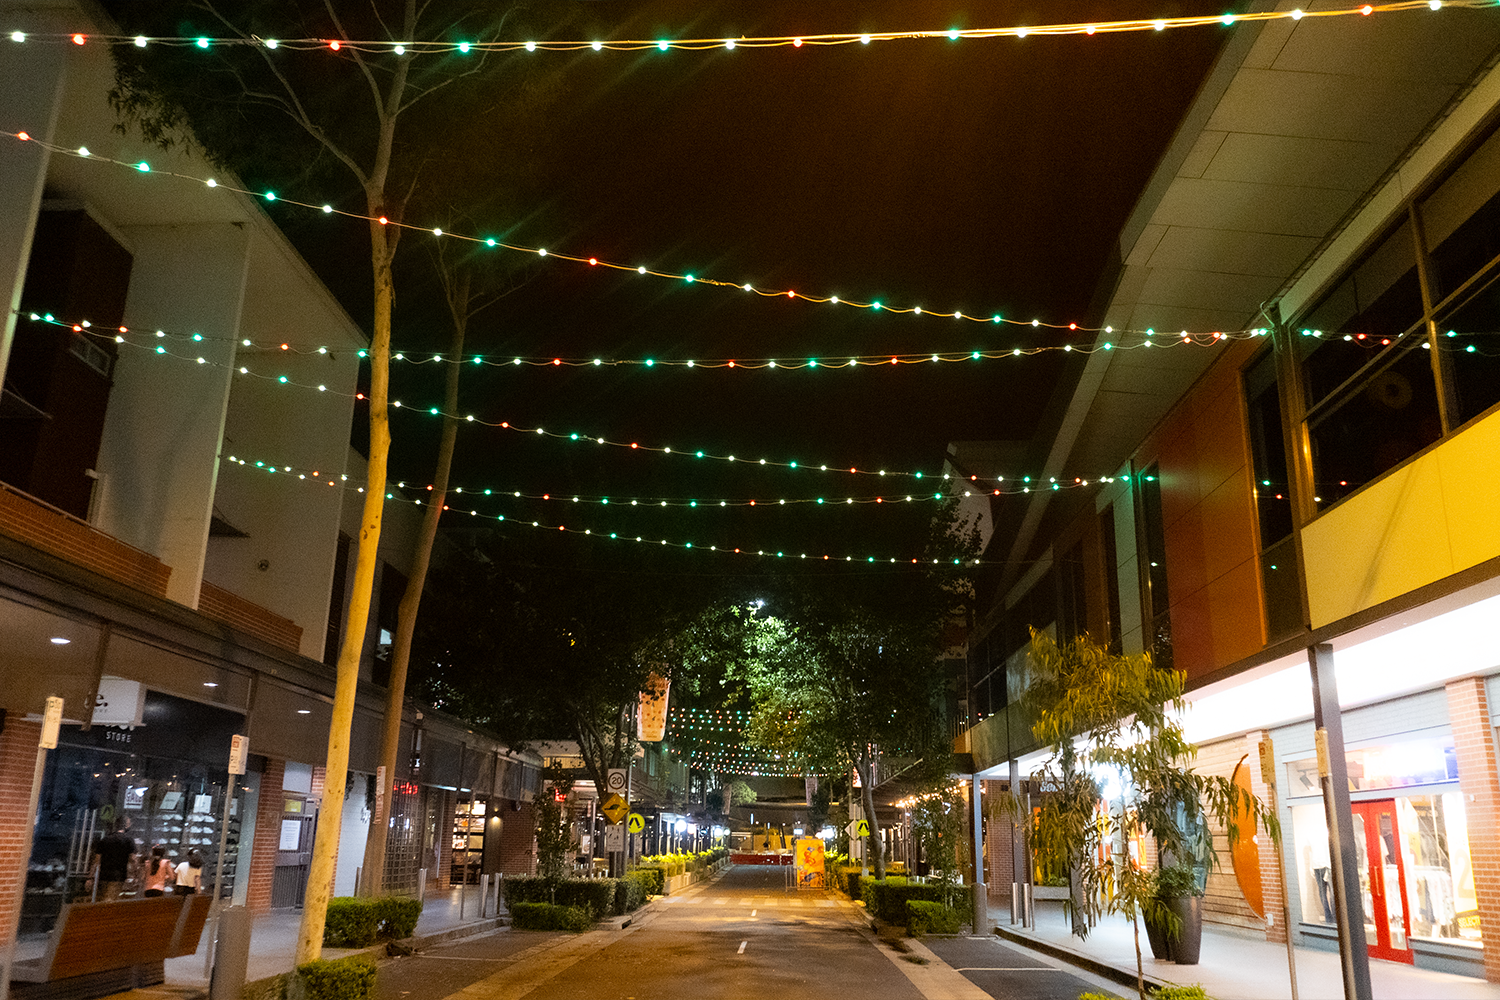 Event Lighting PIXBALLS2 Outdoor Festoon Lighting System, Rouse Hill installation, view from street